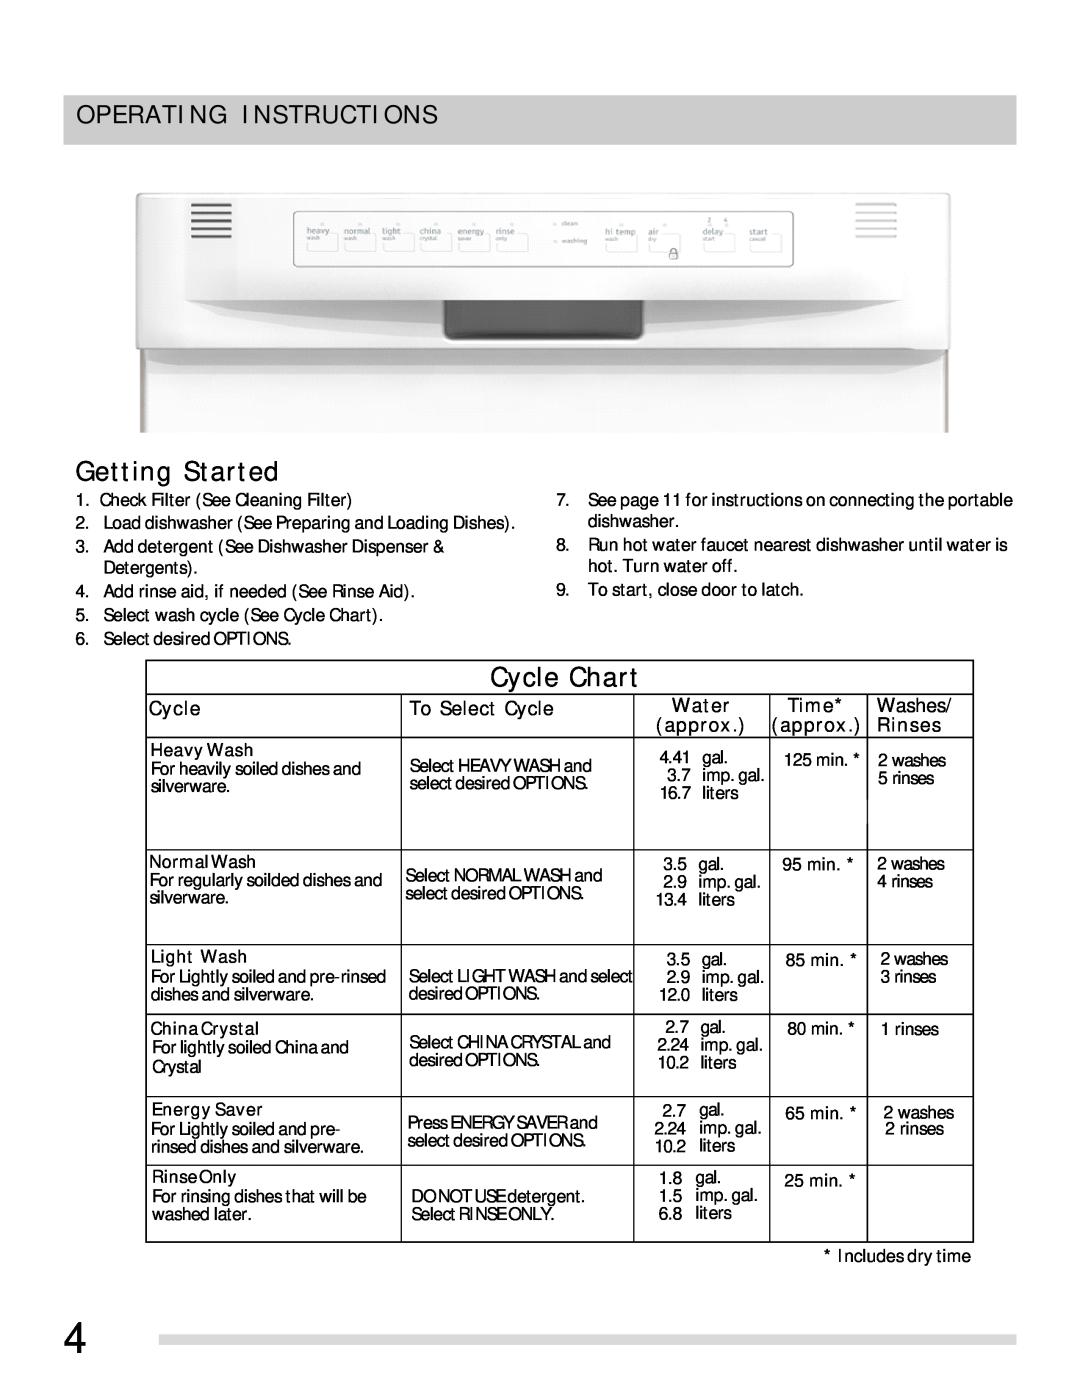 Frigidaire FFBD1821MB Operating Instructions, To Select Cycle, Time, approx, Rinses, Washes, Heavy Wash, NormalWash 